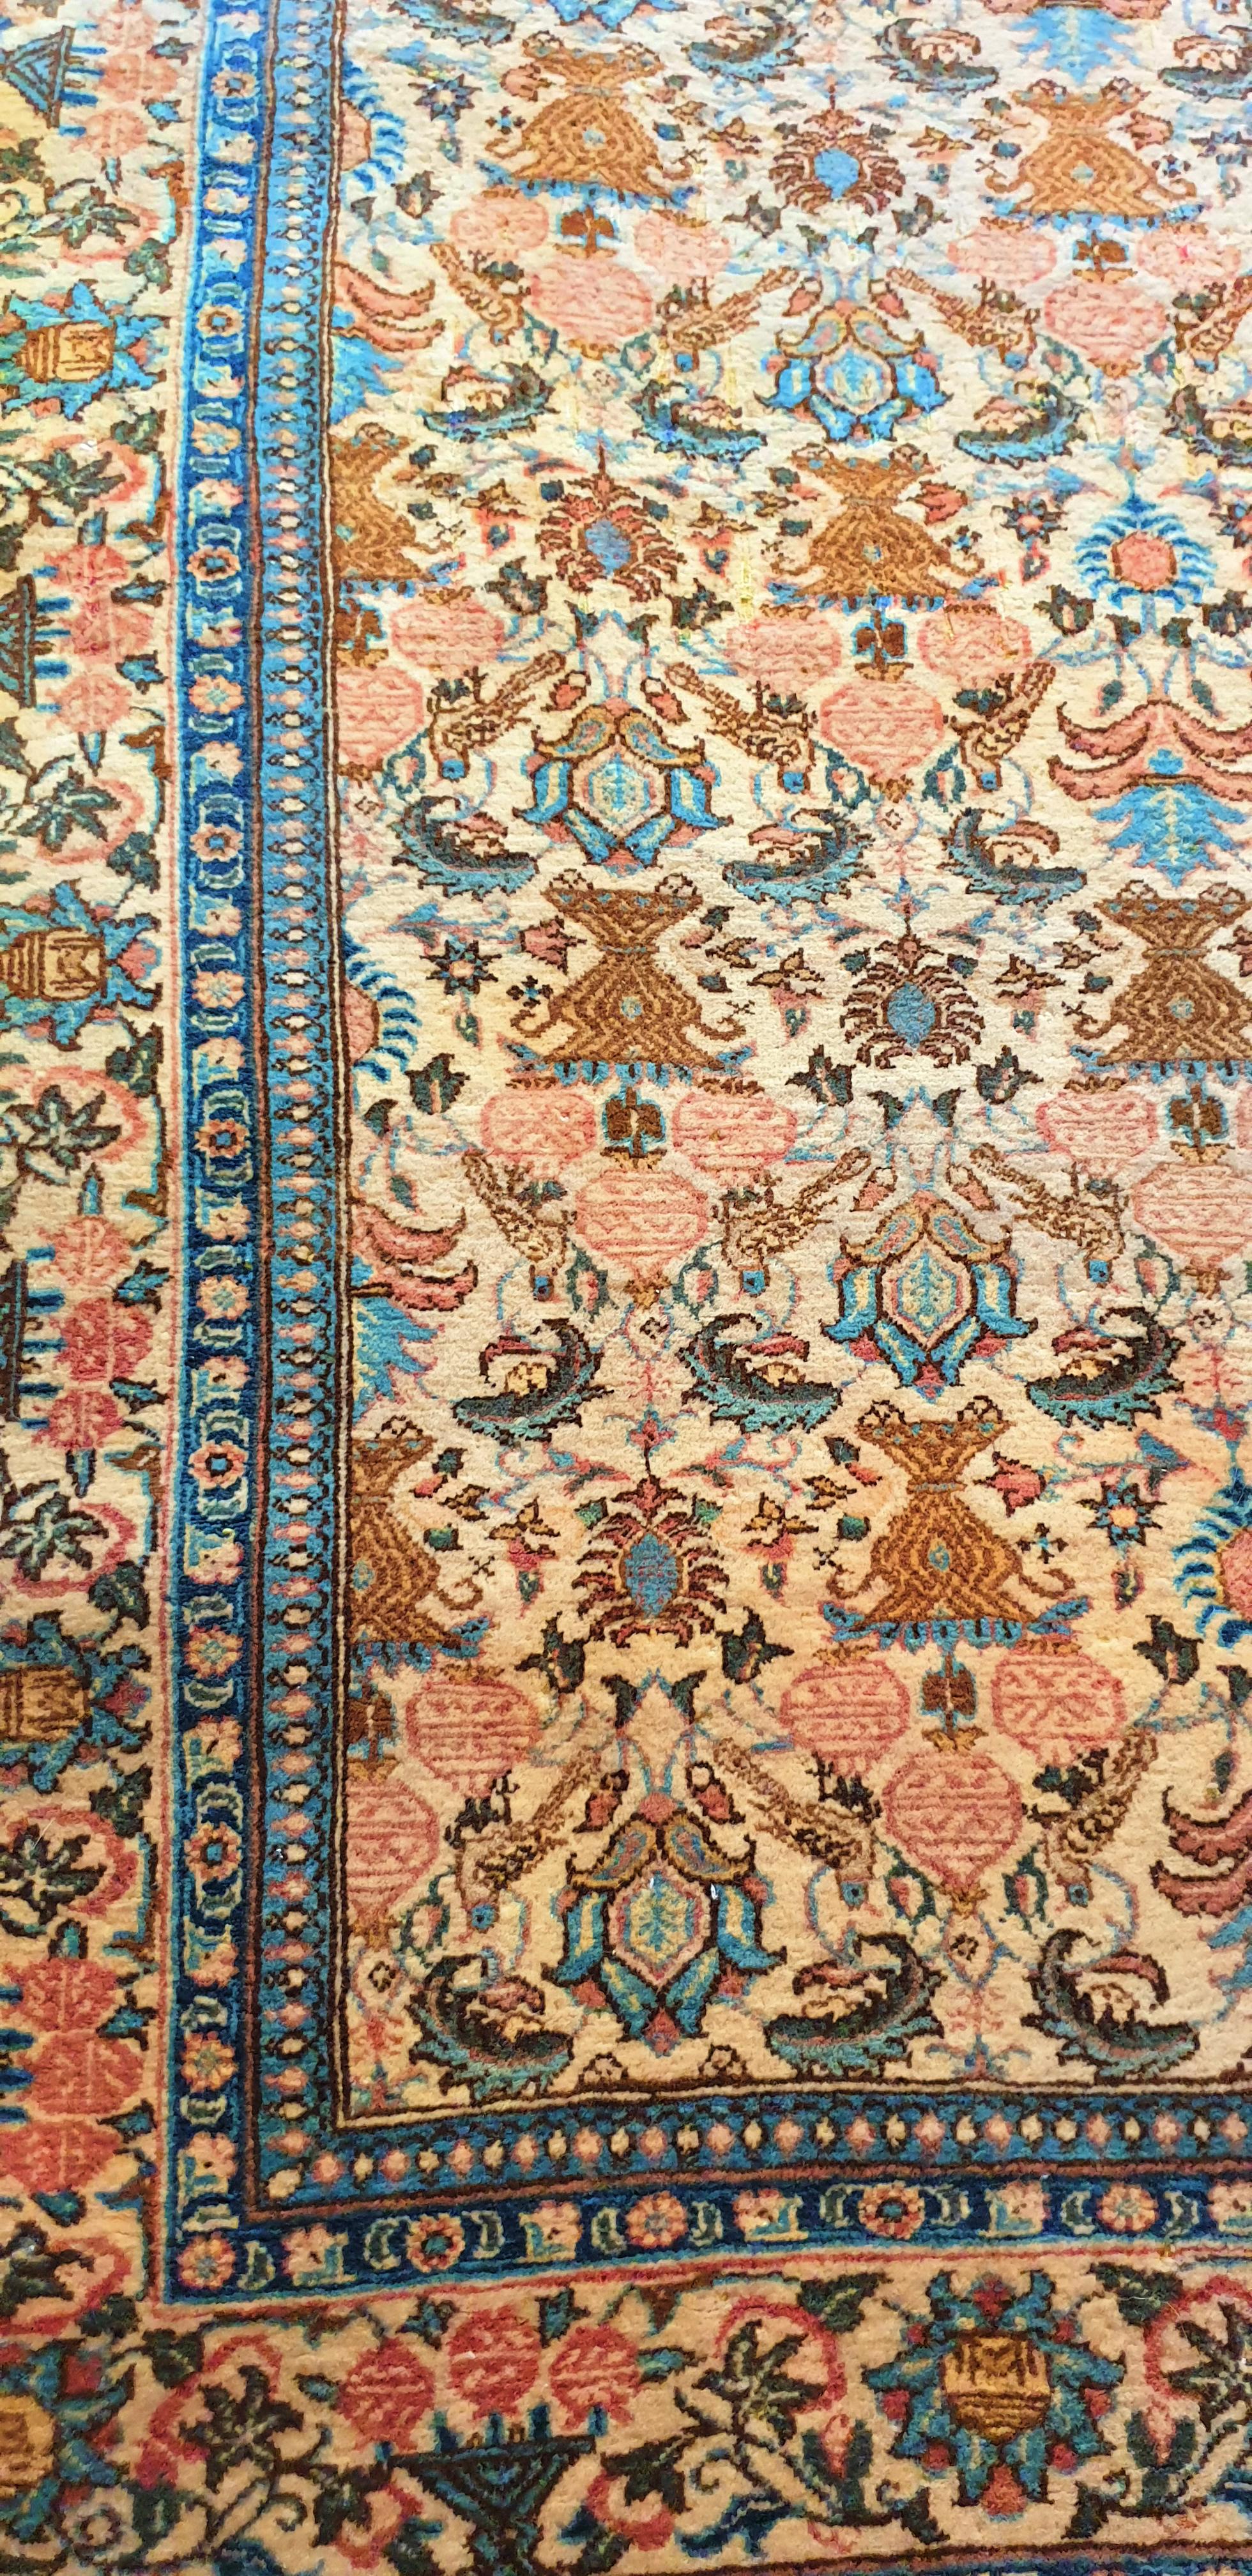 916 - very beautiful carpet from the end of the middle of the 20th century with a very beautiful design of flowers, and pretty colors in the colors red, blue, green and yellow on beige ground, entirely hand-knotted with wool velvet on a cotton